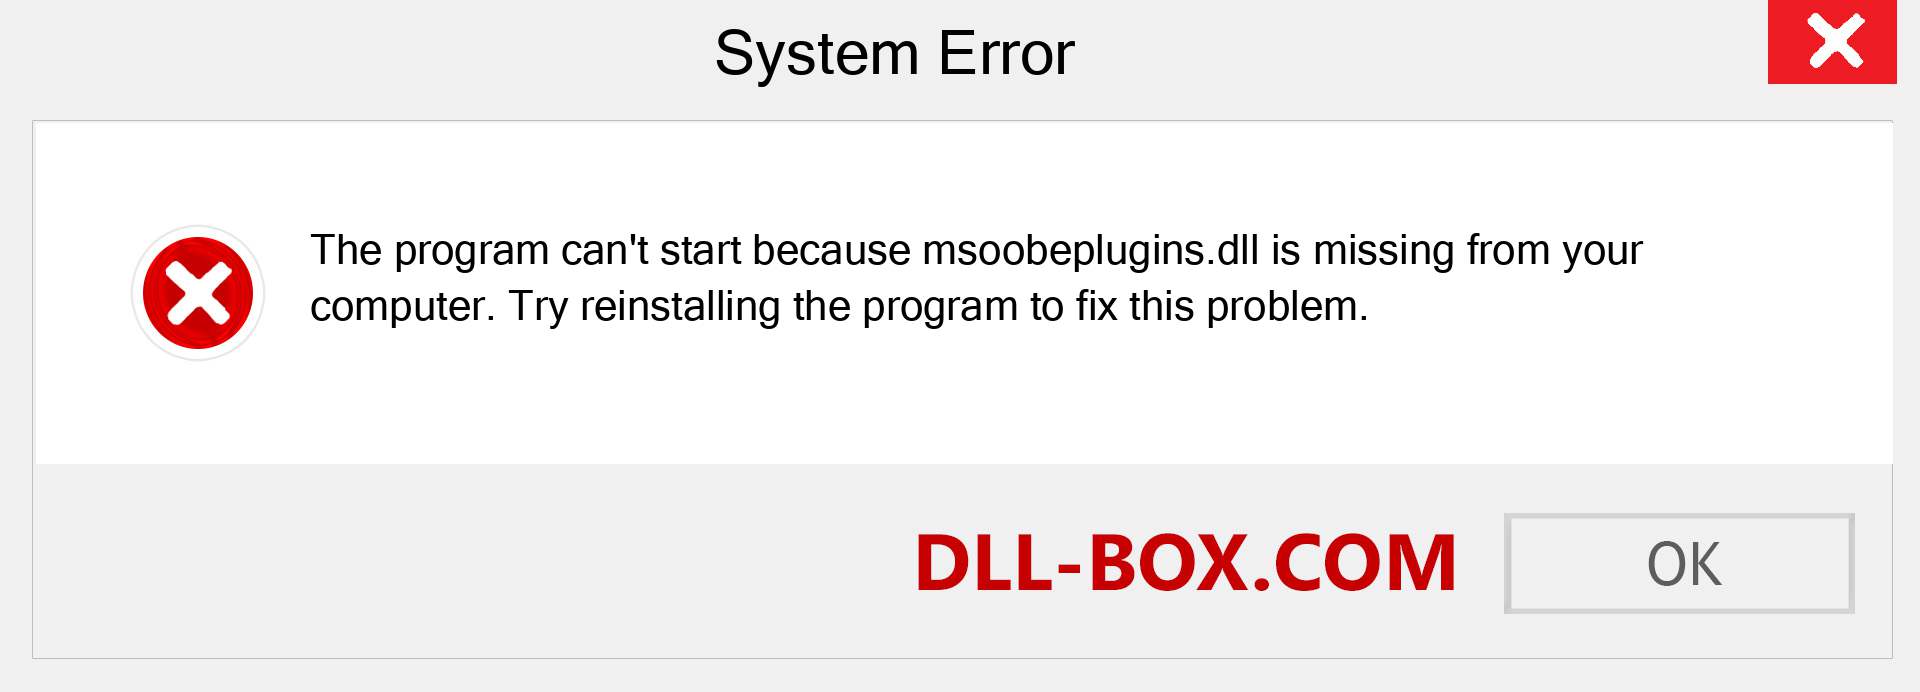  msoobeplugins.dll file is missing?. Download for Windows 7, 8, 10 - Fix  msoobeplugins dll Missing Error on Windows, photos, images